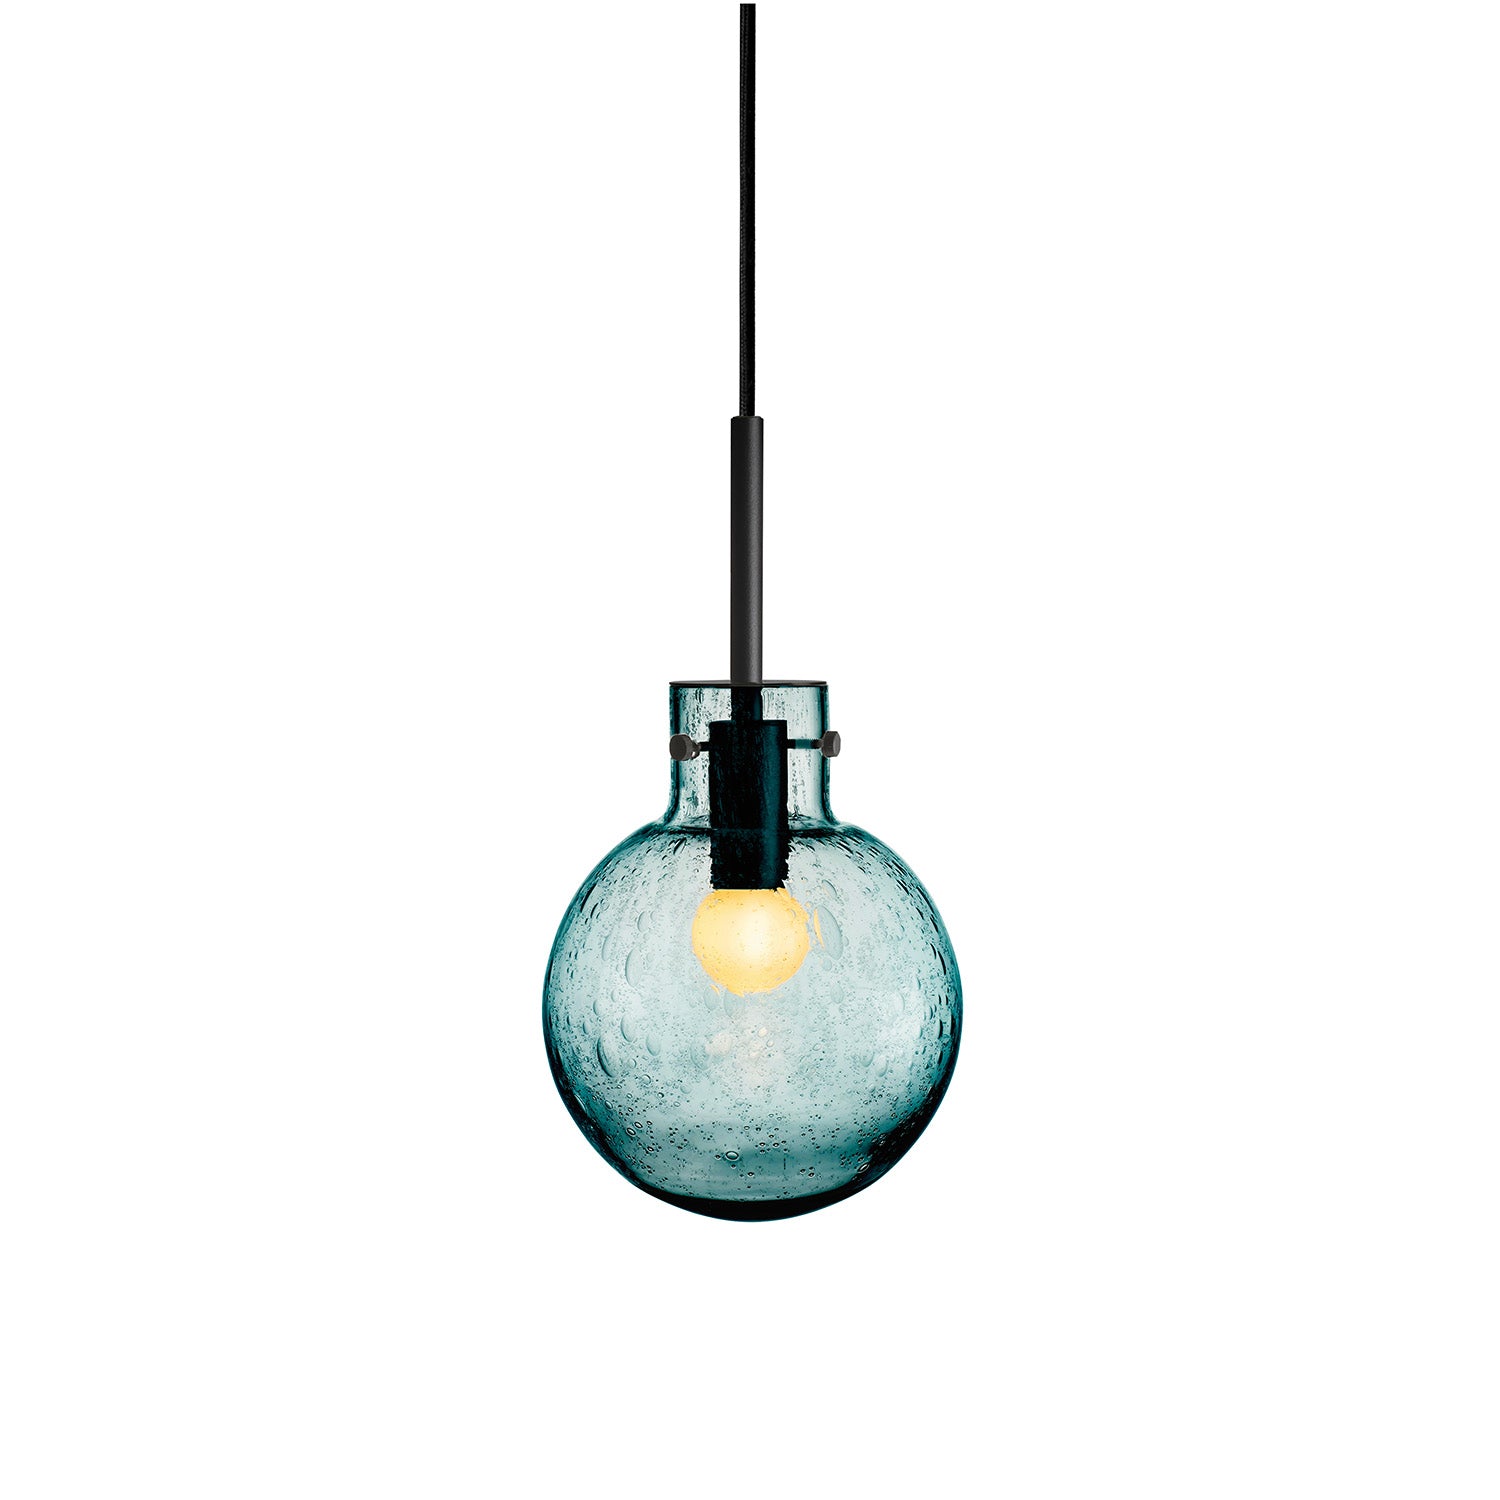 SODA - Handcrafted blown glass pendant lamp